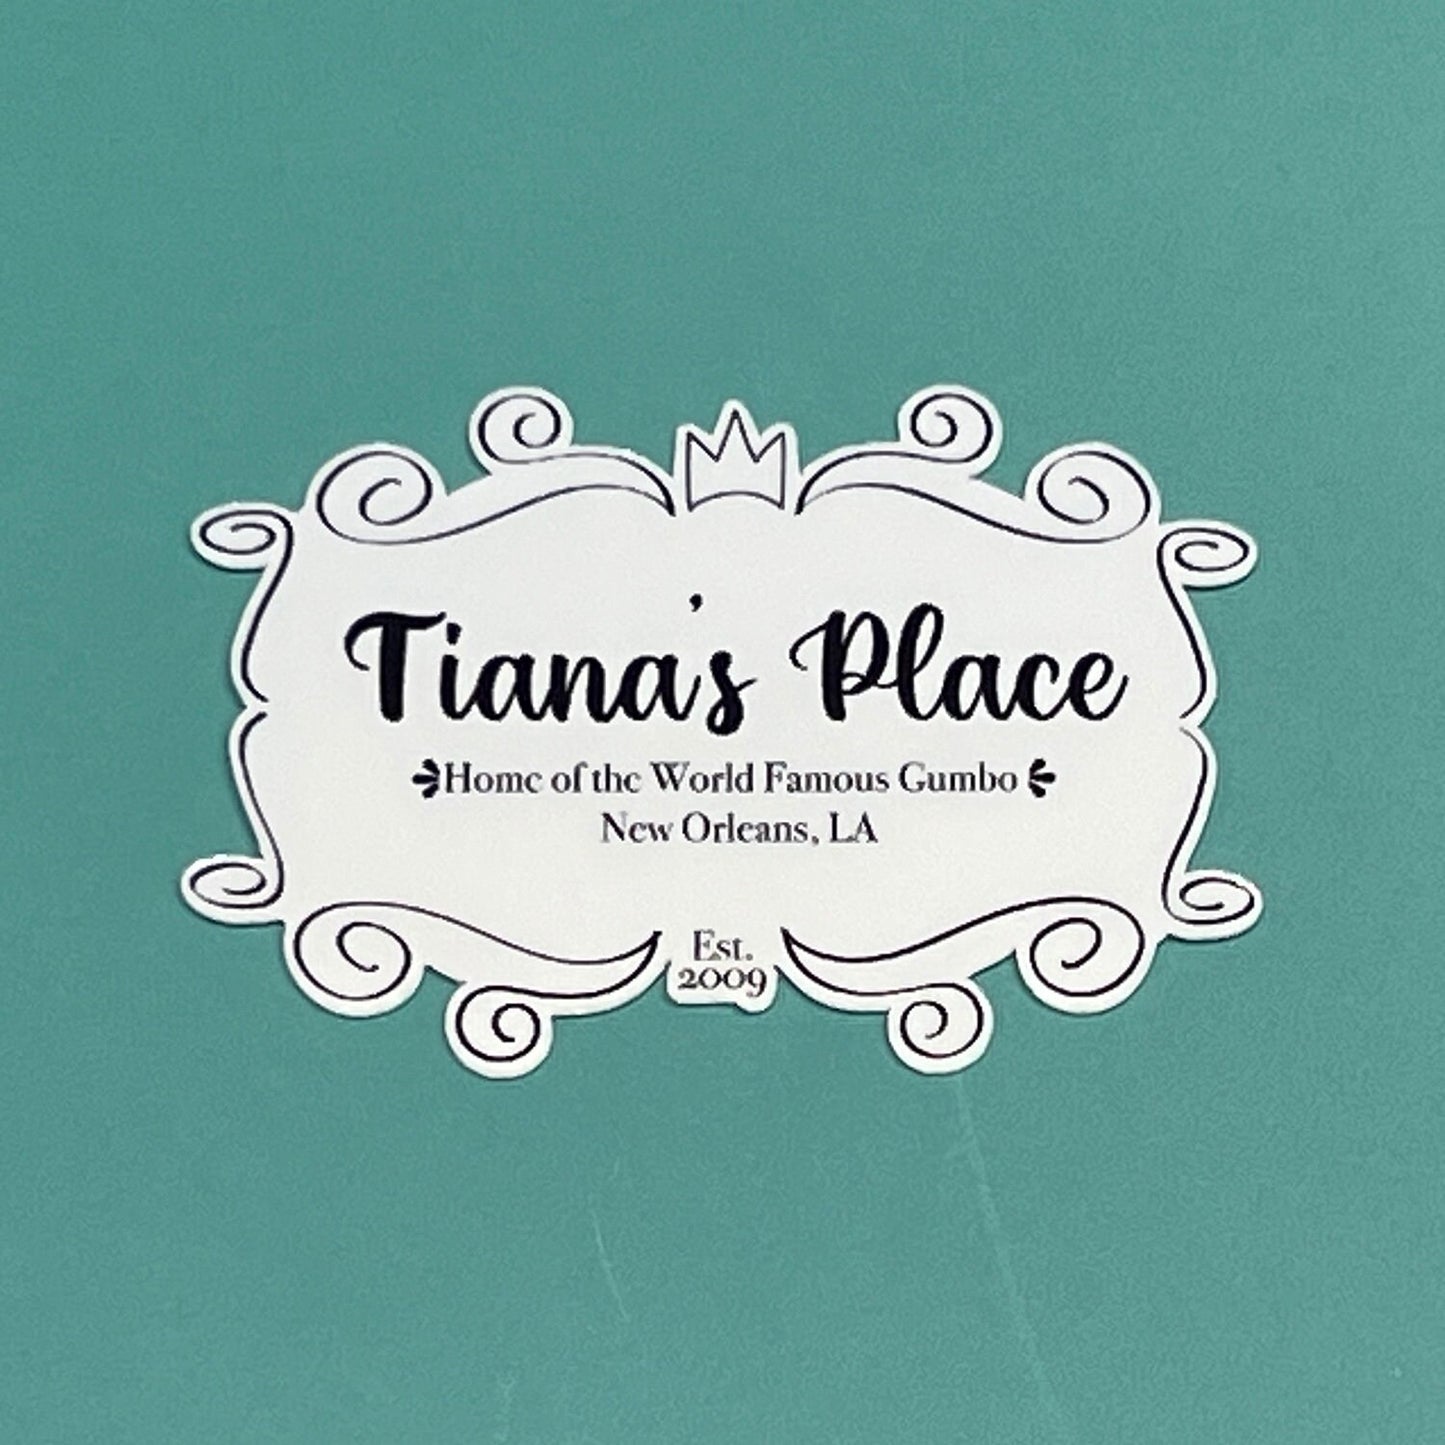 Tiana's Place New Orleans, LA - Princess and the Frog Inspired Waterproof Sticker